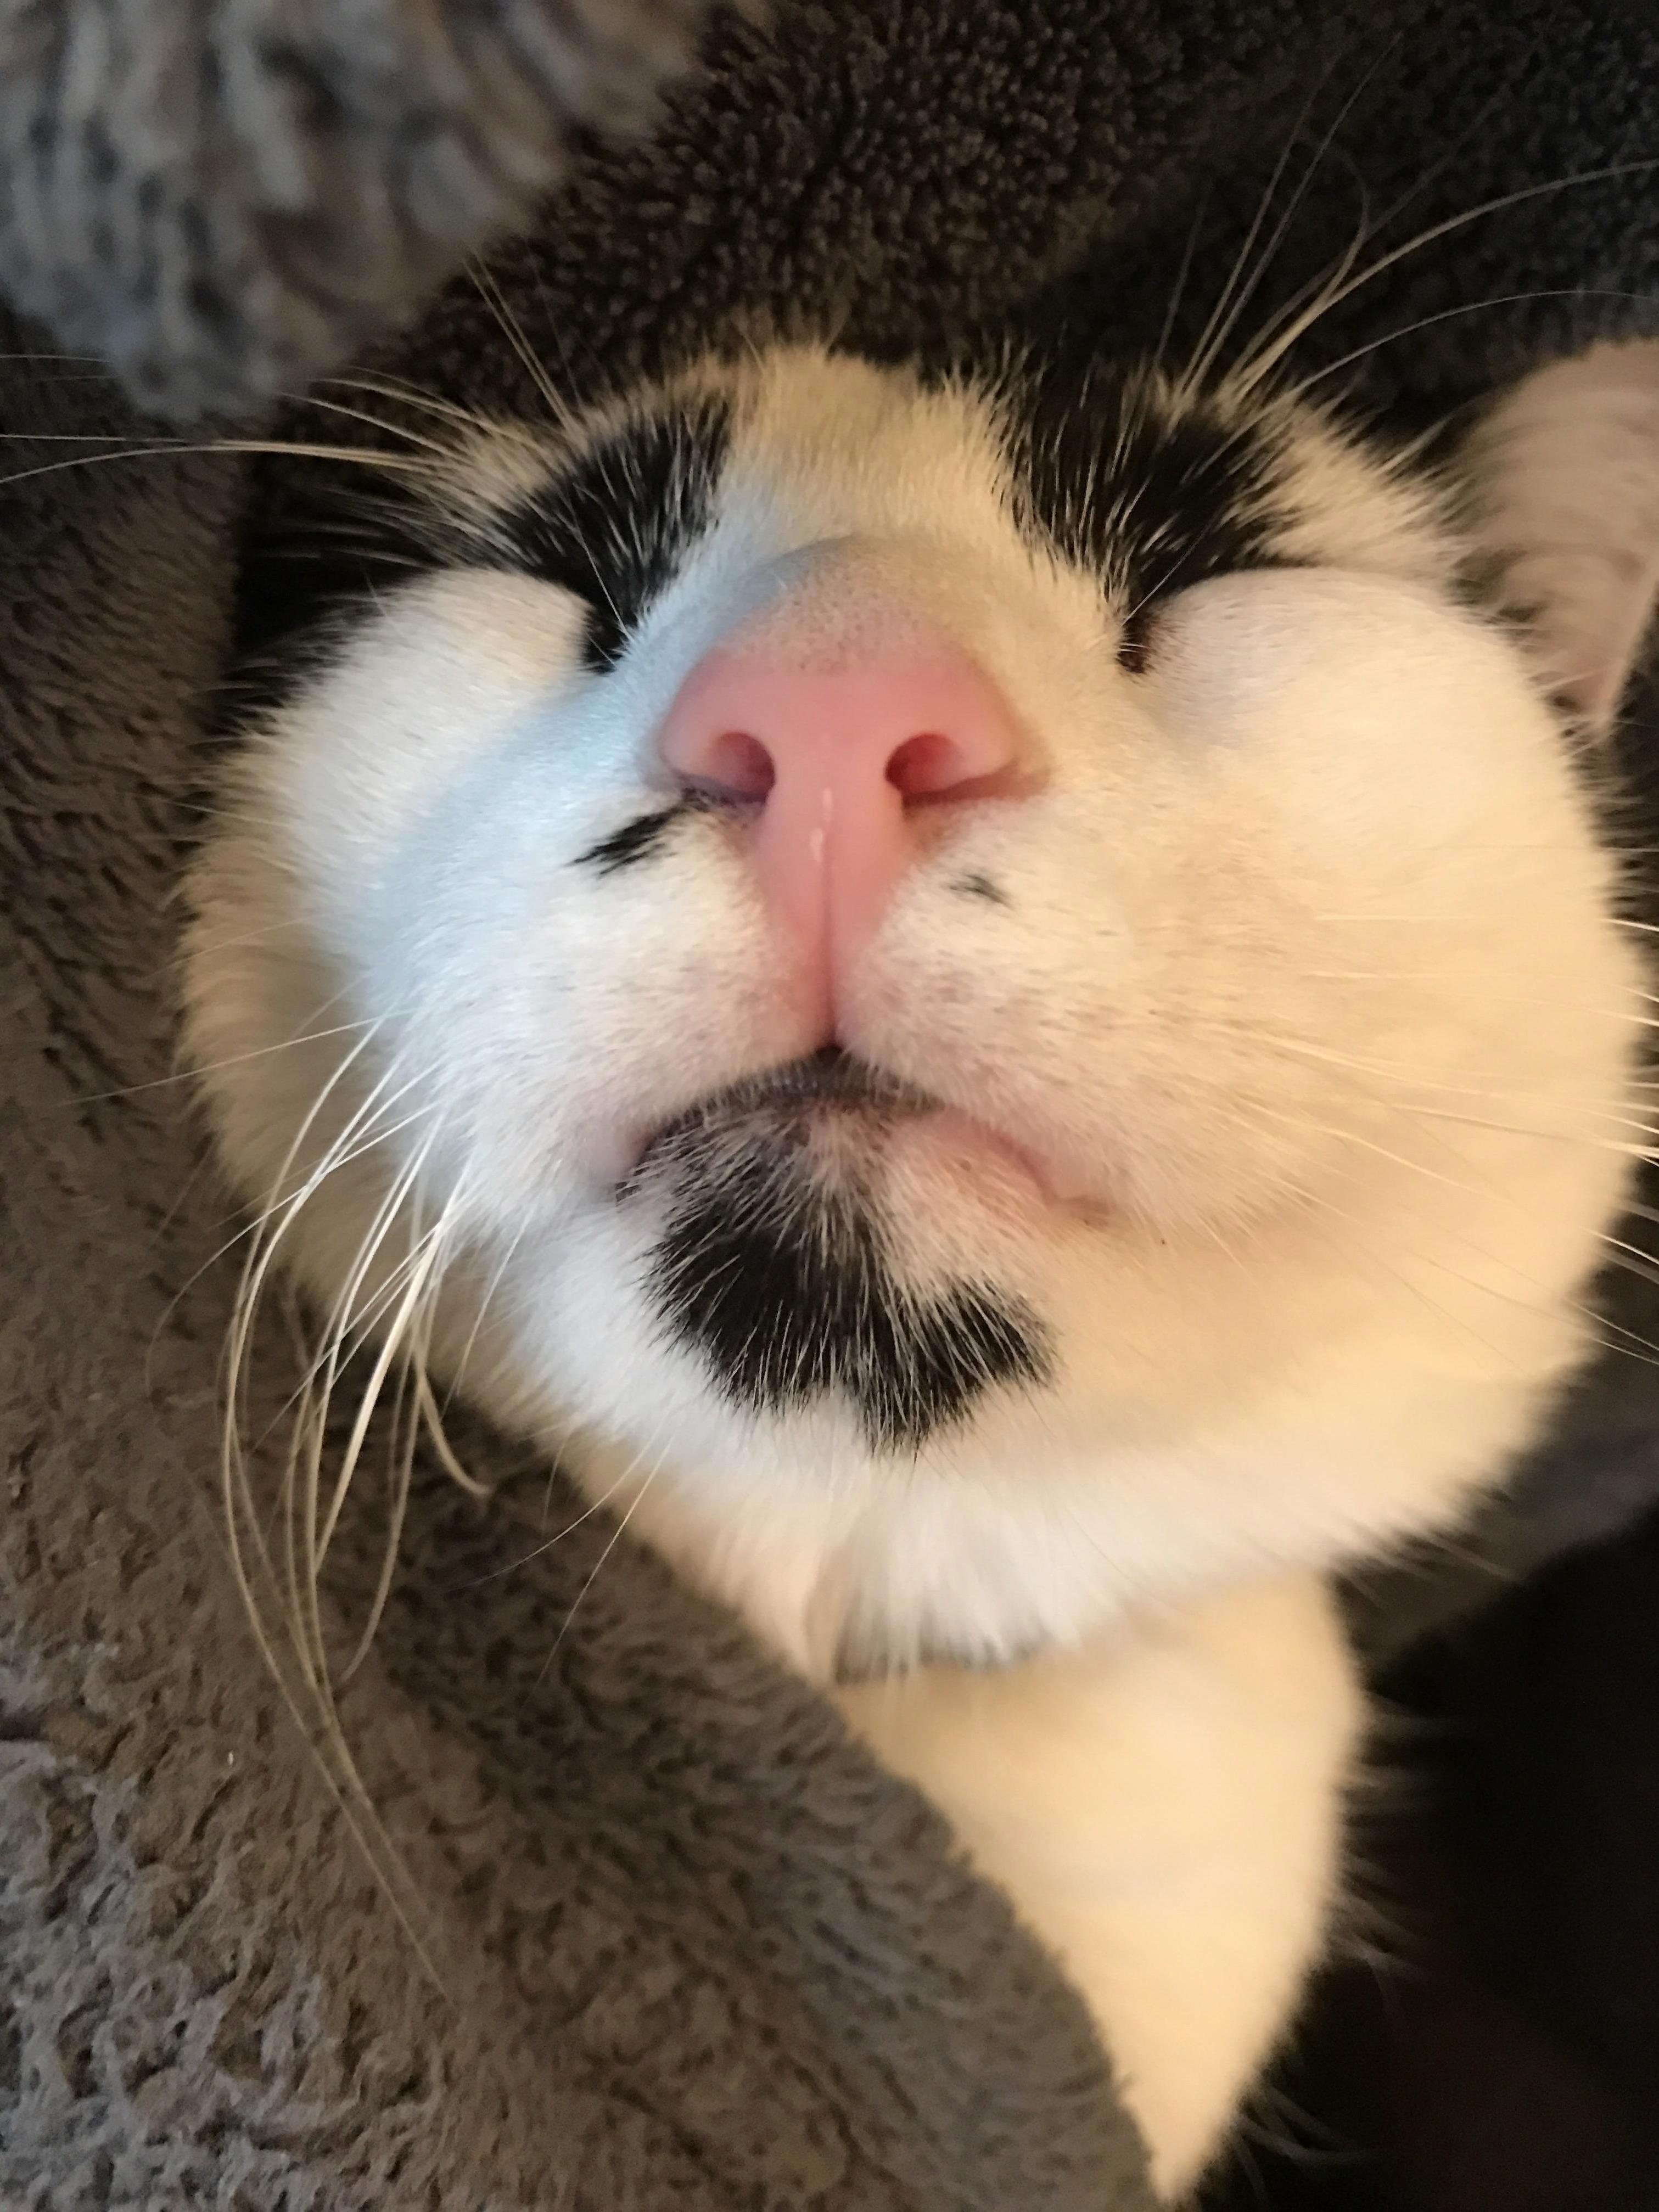 Lil sushi kitty nose he kisses me when i touch it. i like having my first kitty crosspost with raww